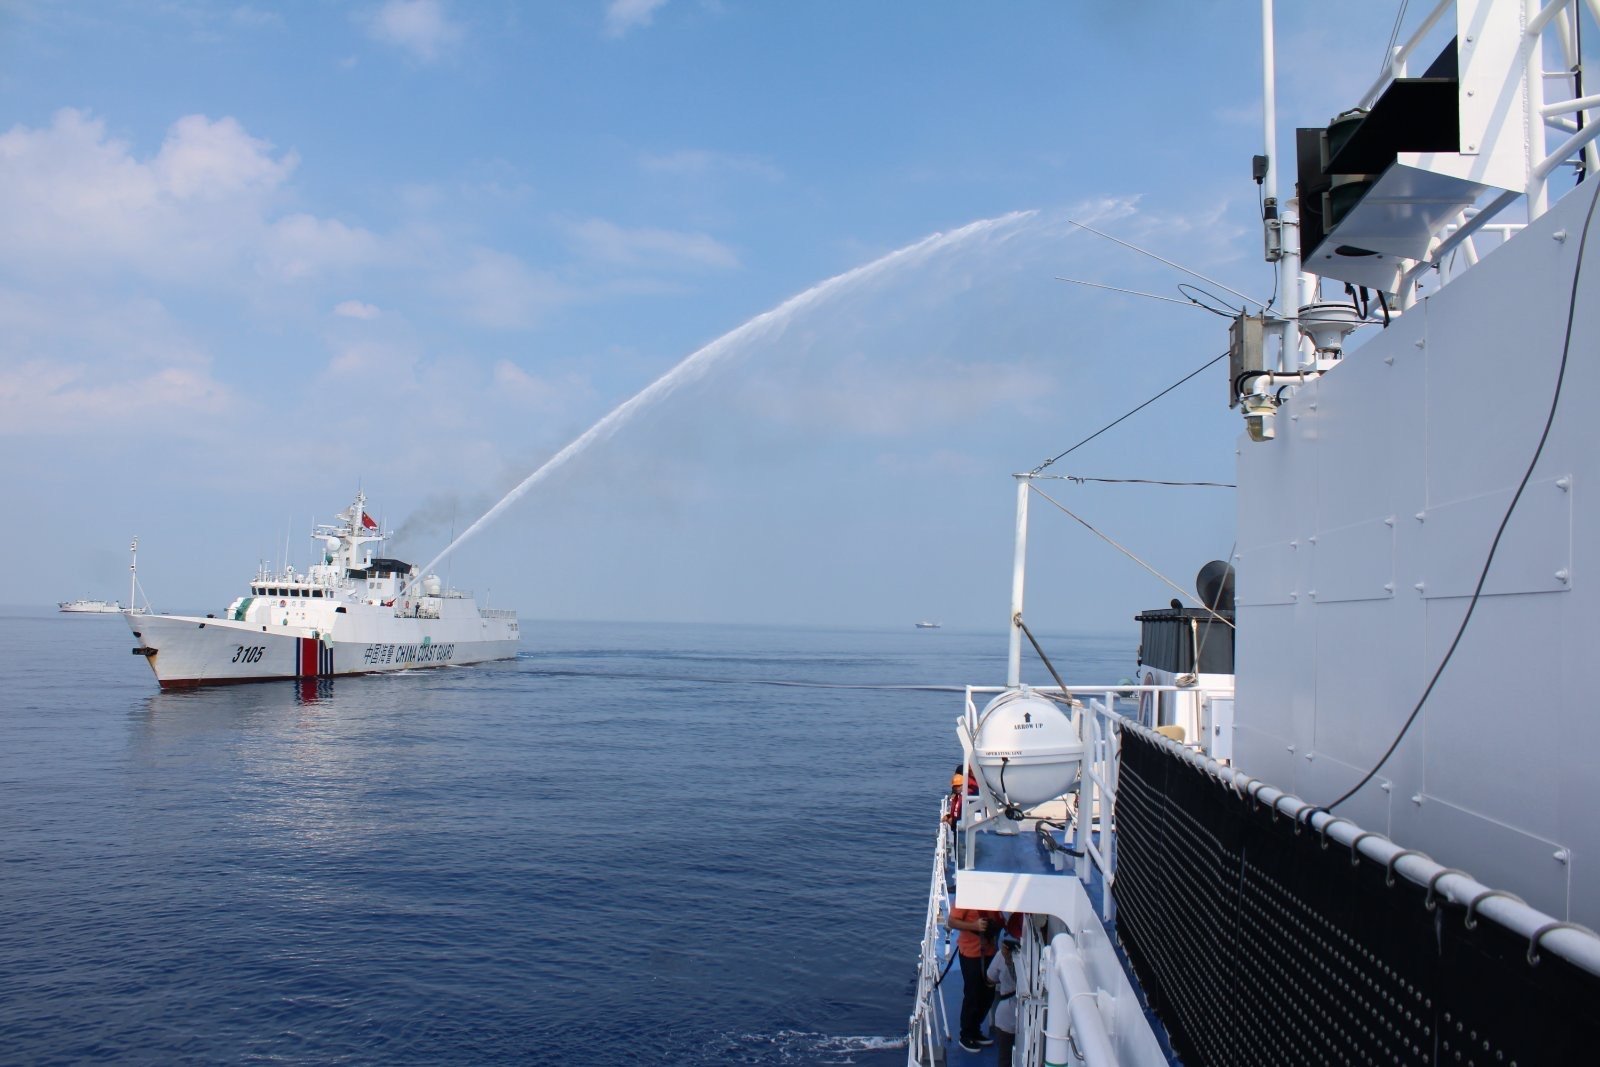 A Chinese Coast Guard ship fires a water cannon on a Philippine Coast Guard vessel near Scarborough Shoal in the South China Sea on April 30. Photo: EPA-EFE/Philippine Coast Guard